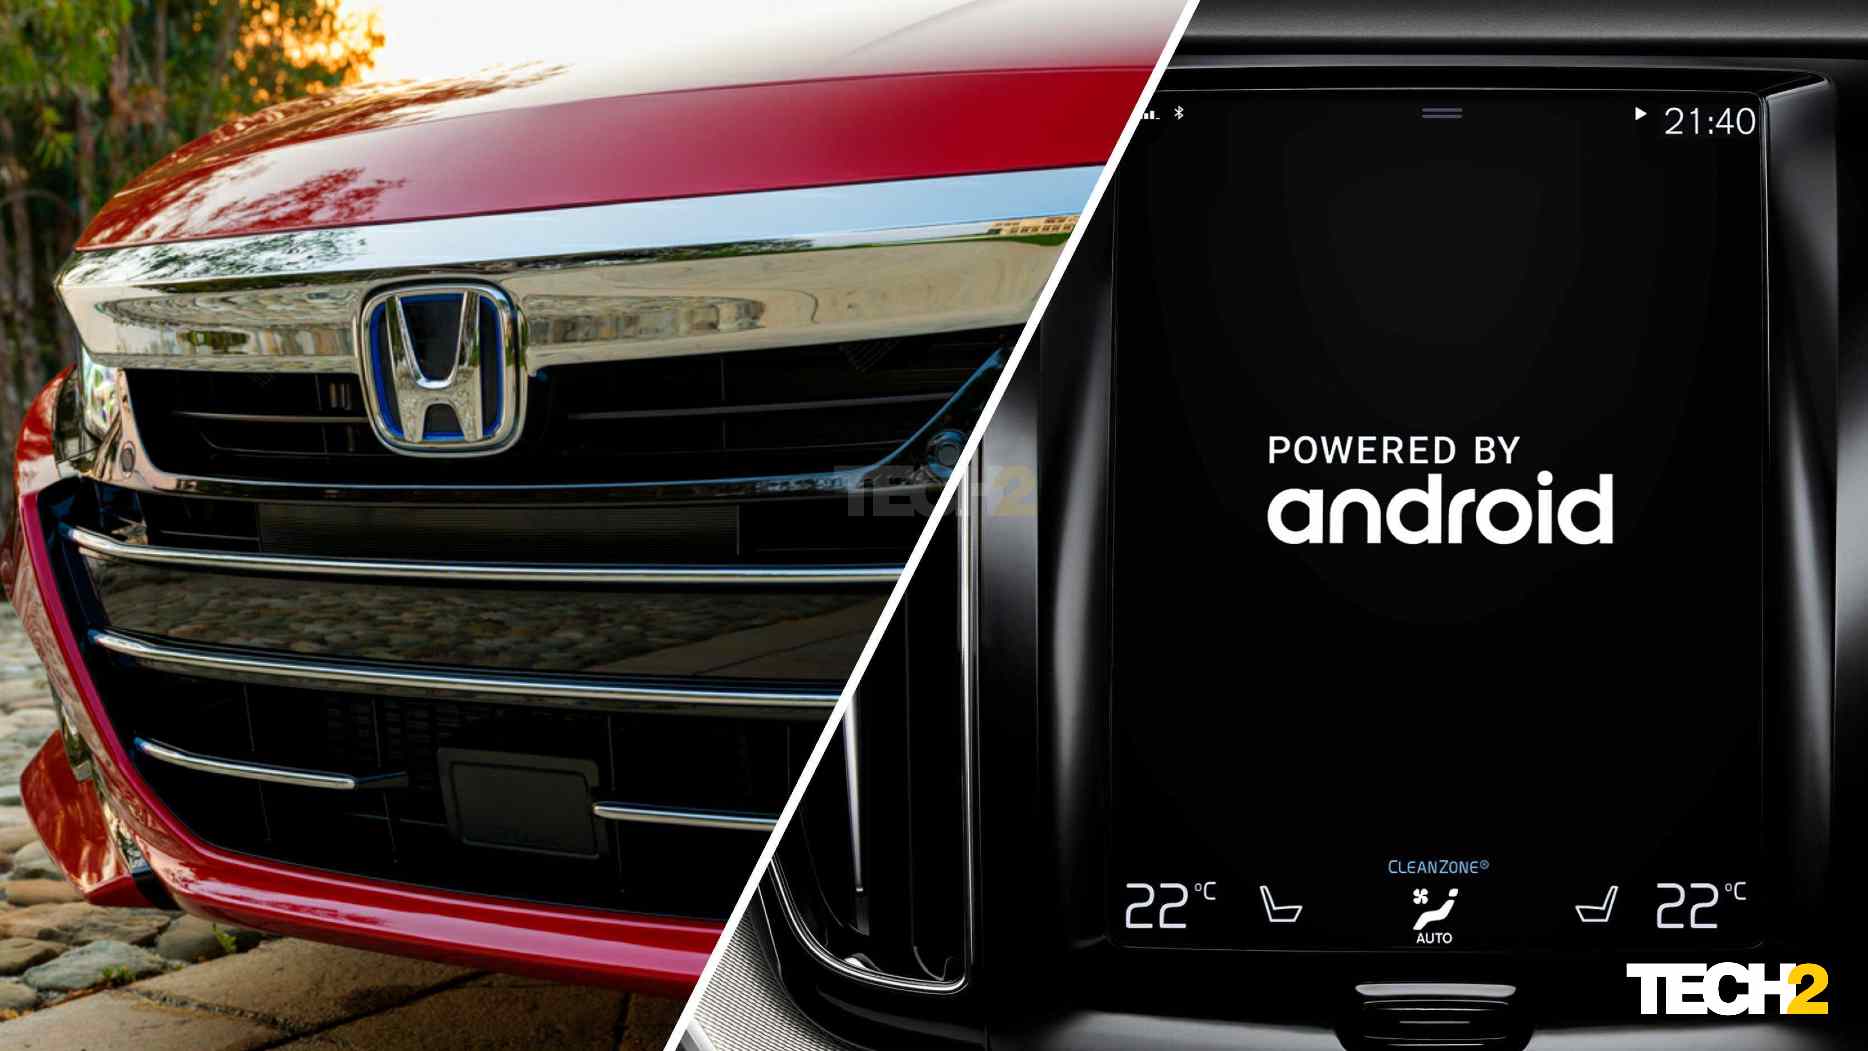 The first Honda to feature Android Automotive - an all-new vehicle - will be introduced in the US in the second half of 2022. Image: Honda and Volvo